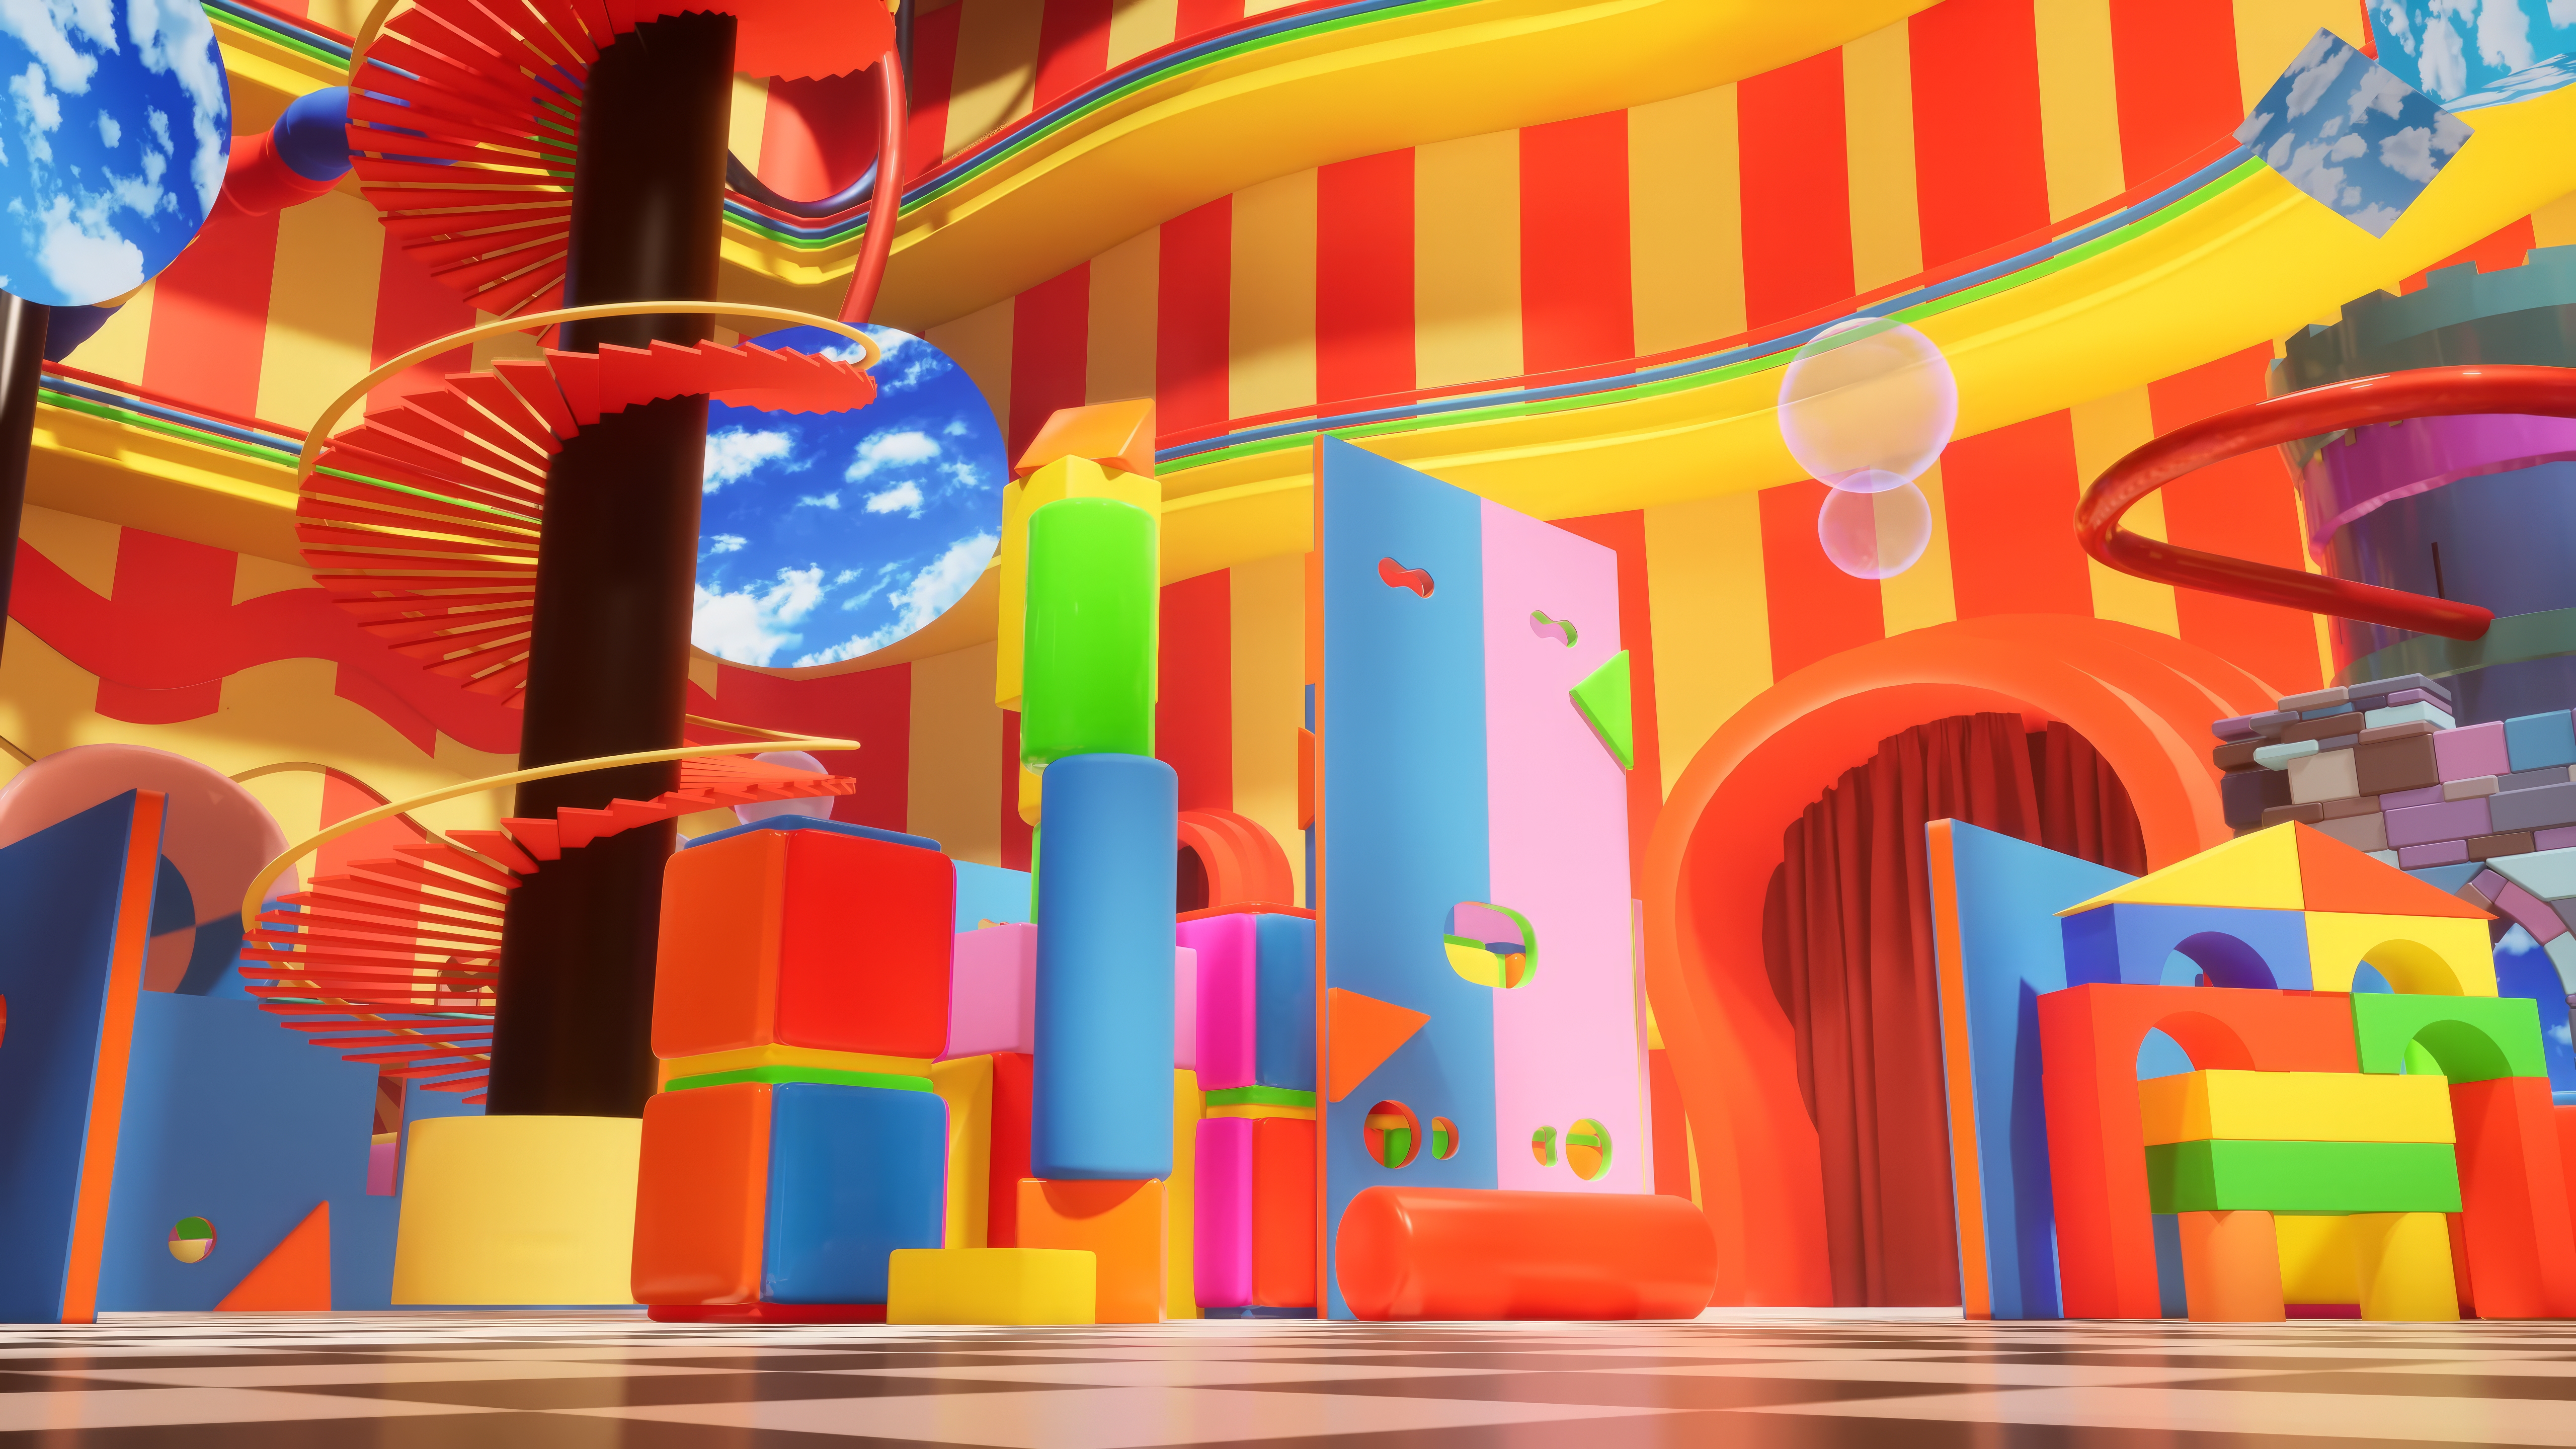 General 5120x2880 The Amazing Digital Circus colorful geometry bright stairs striped indoors